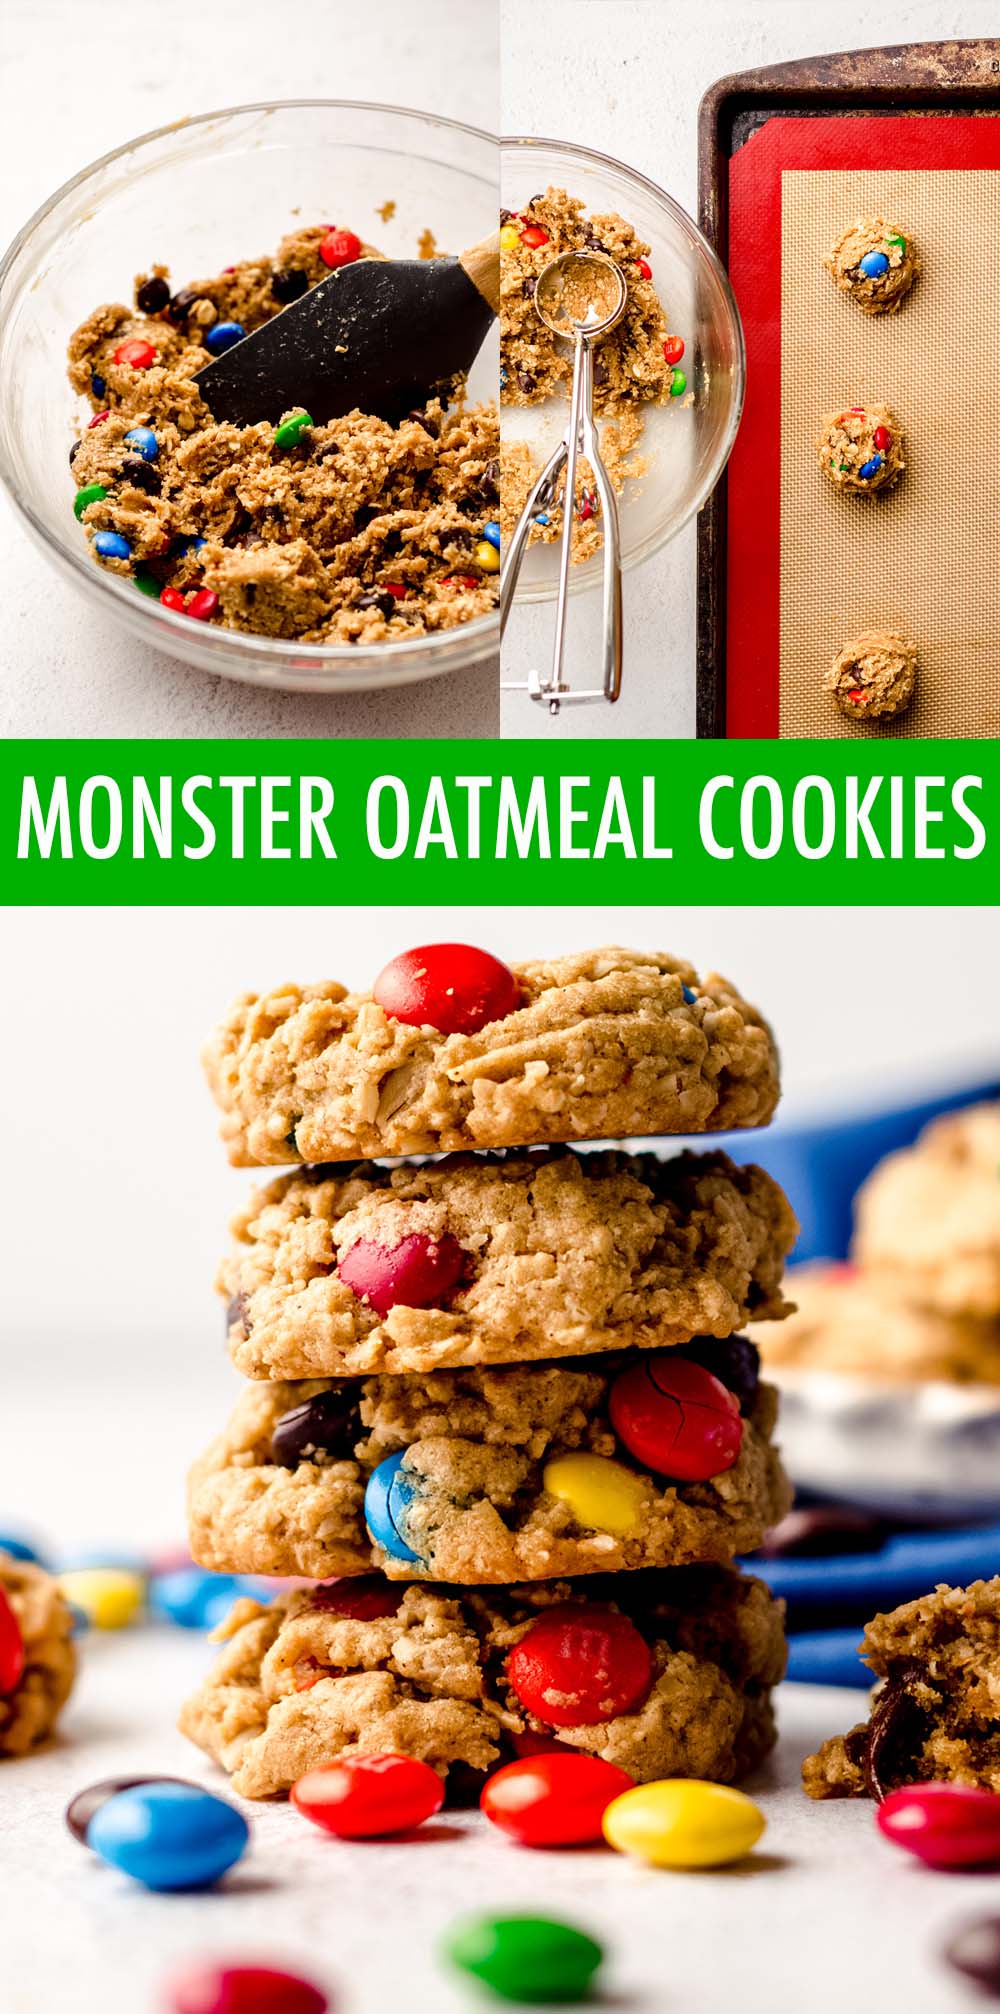 Quick and easy peanut butter oatmeal cookies filled with chocolate chips and m&m's. via @frshaprilflours